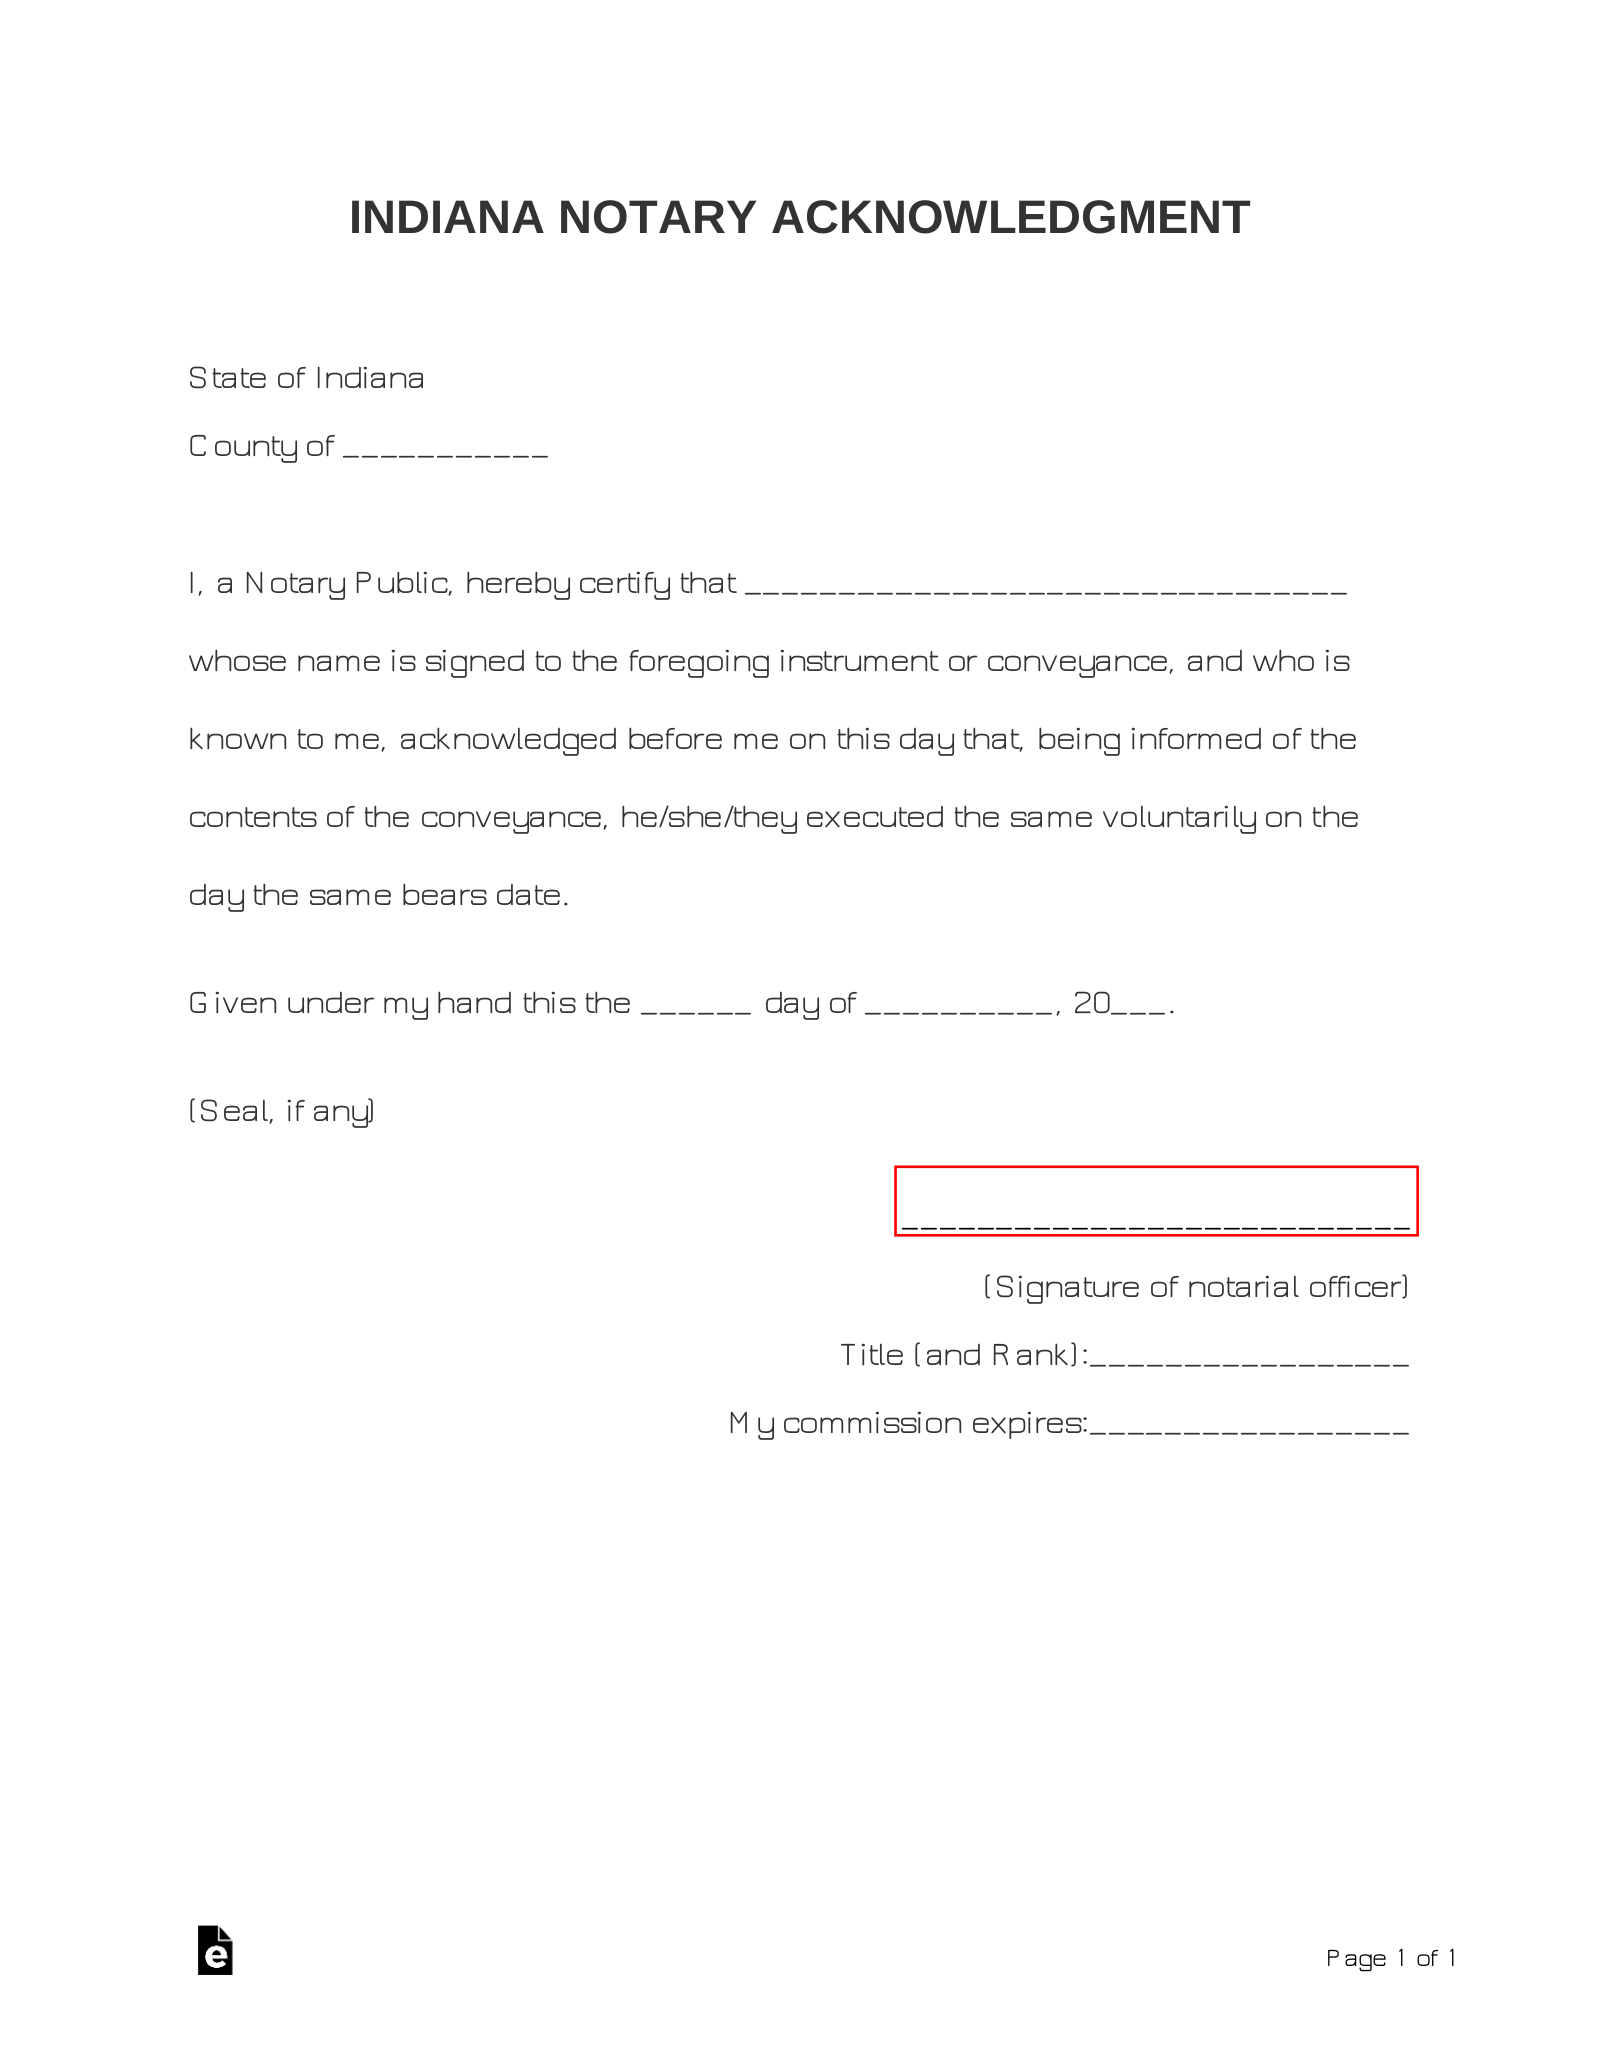 Indiana Notary Acknowledgment Form